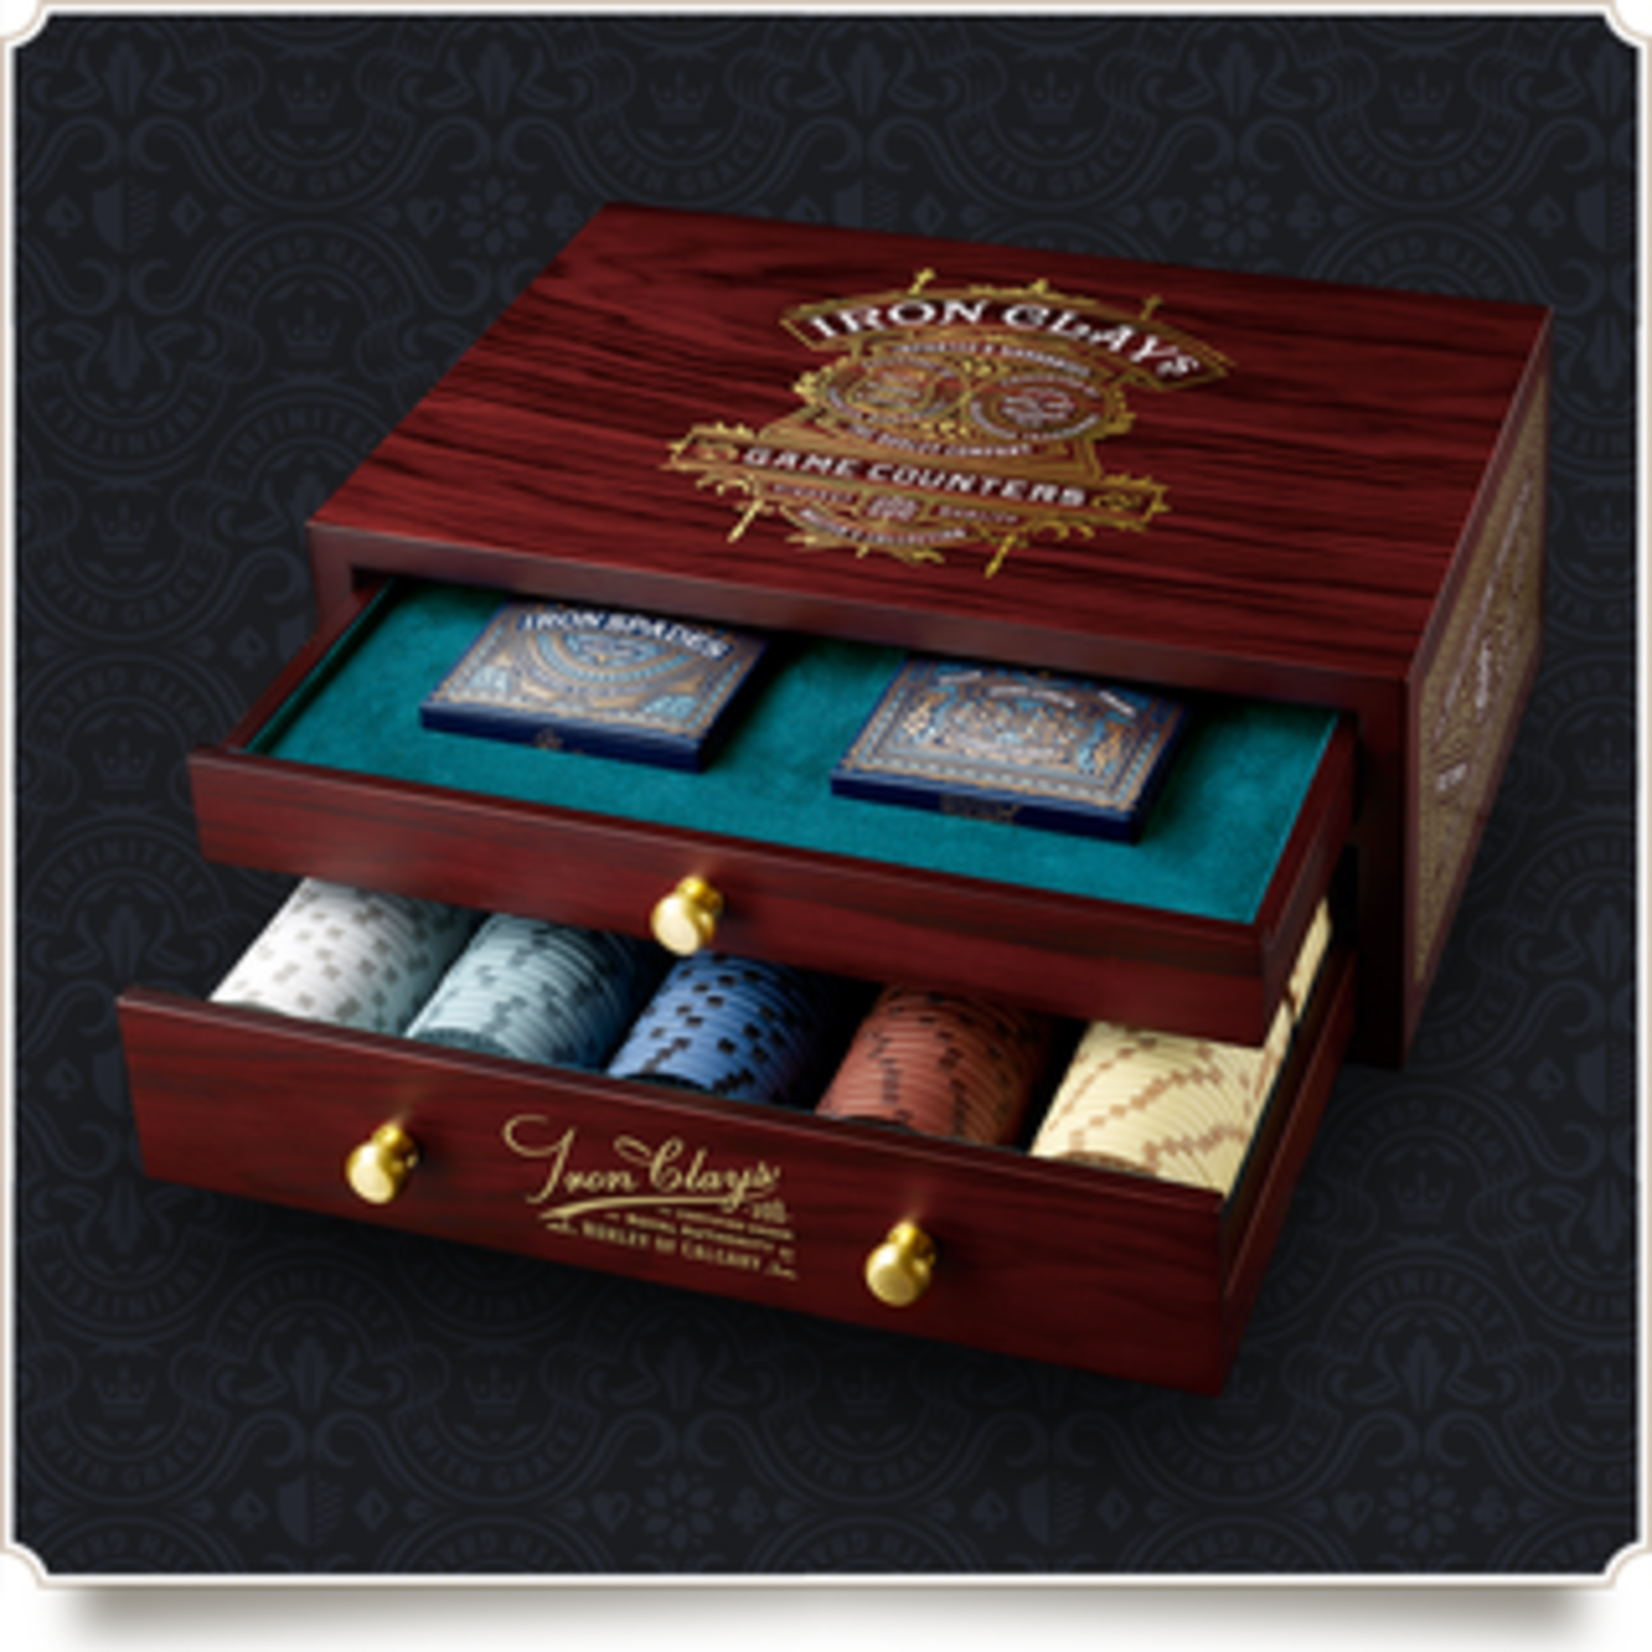 Iron Clays 200 - Wooden Chest Edition - Rosewood (Red)